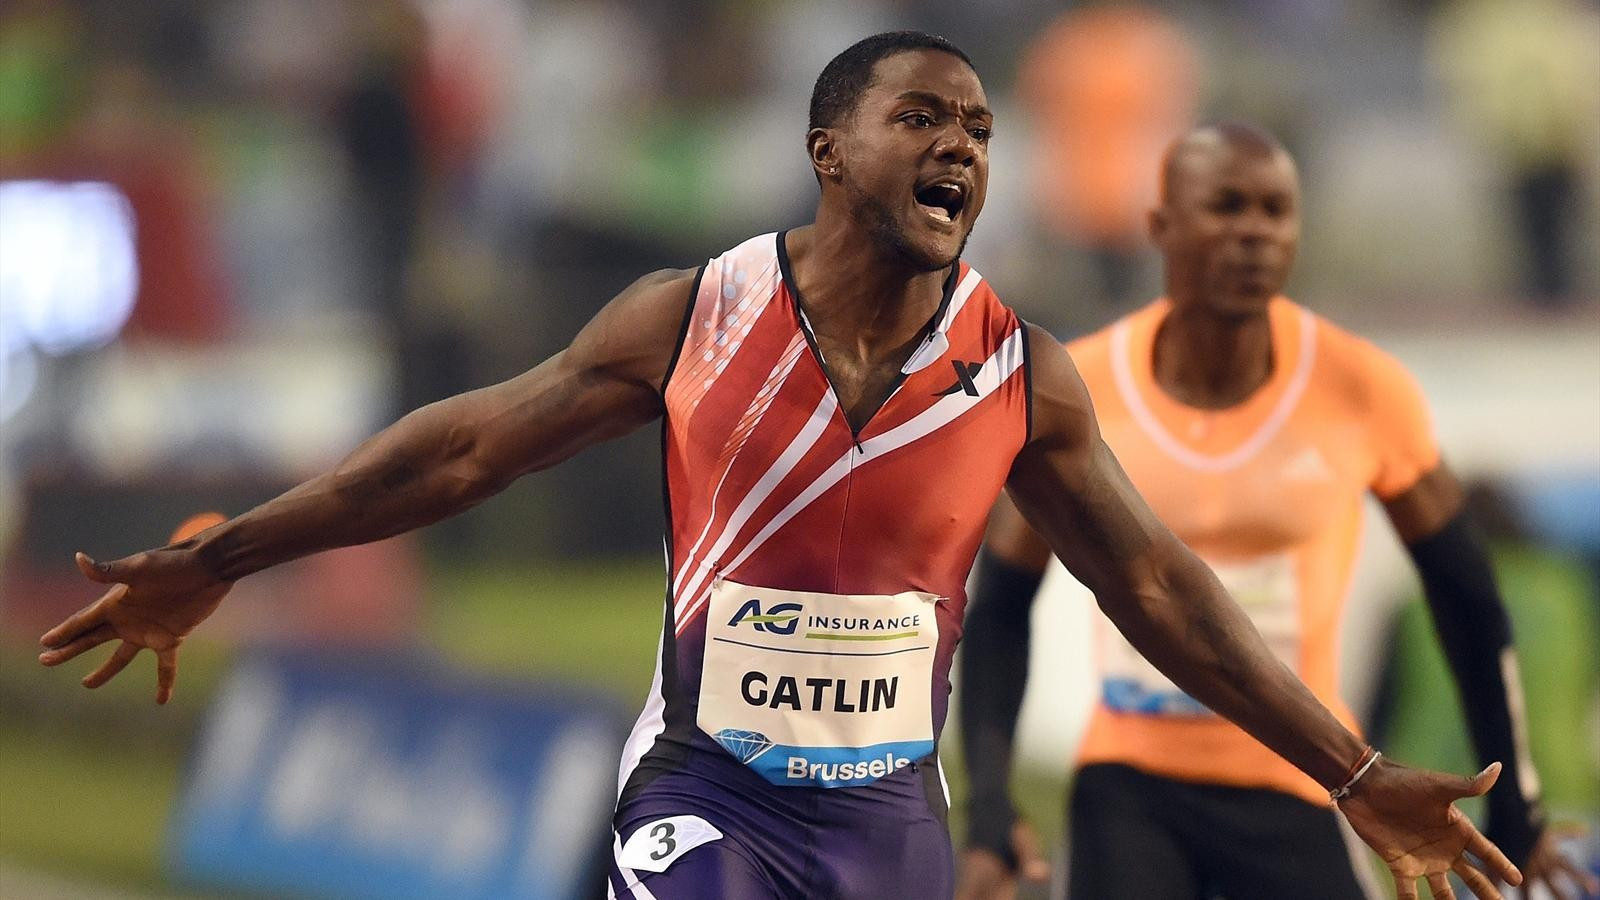 A World Championship gold medal for Justin Gatlin would raise even more questions about doping problems in athletics ©Getty Images